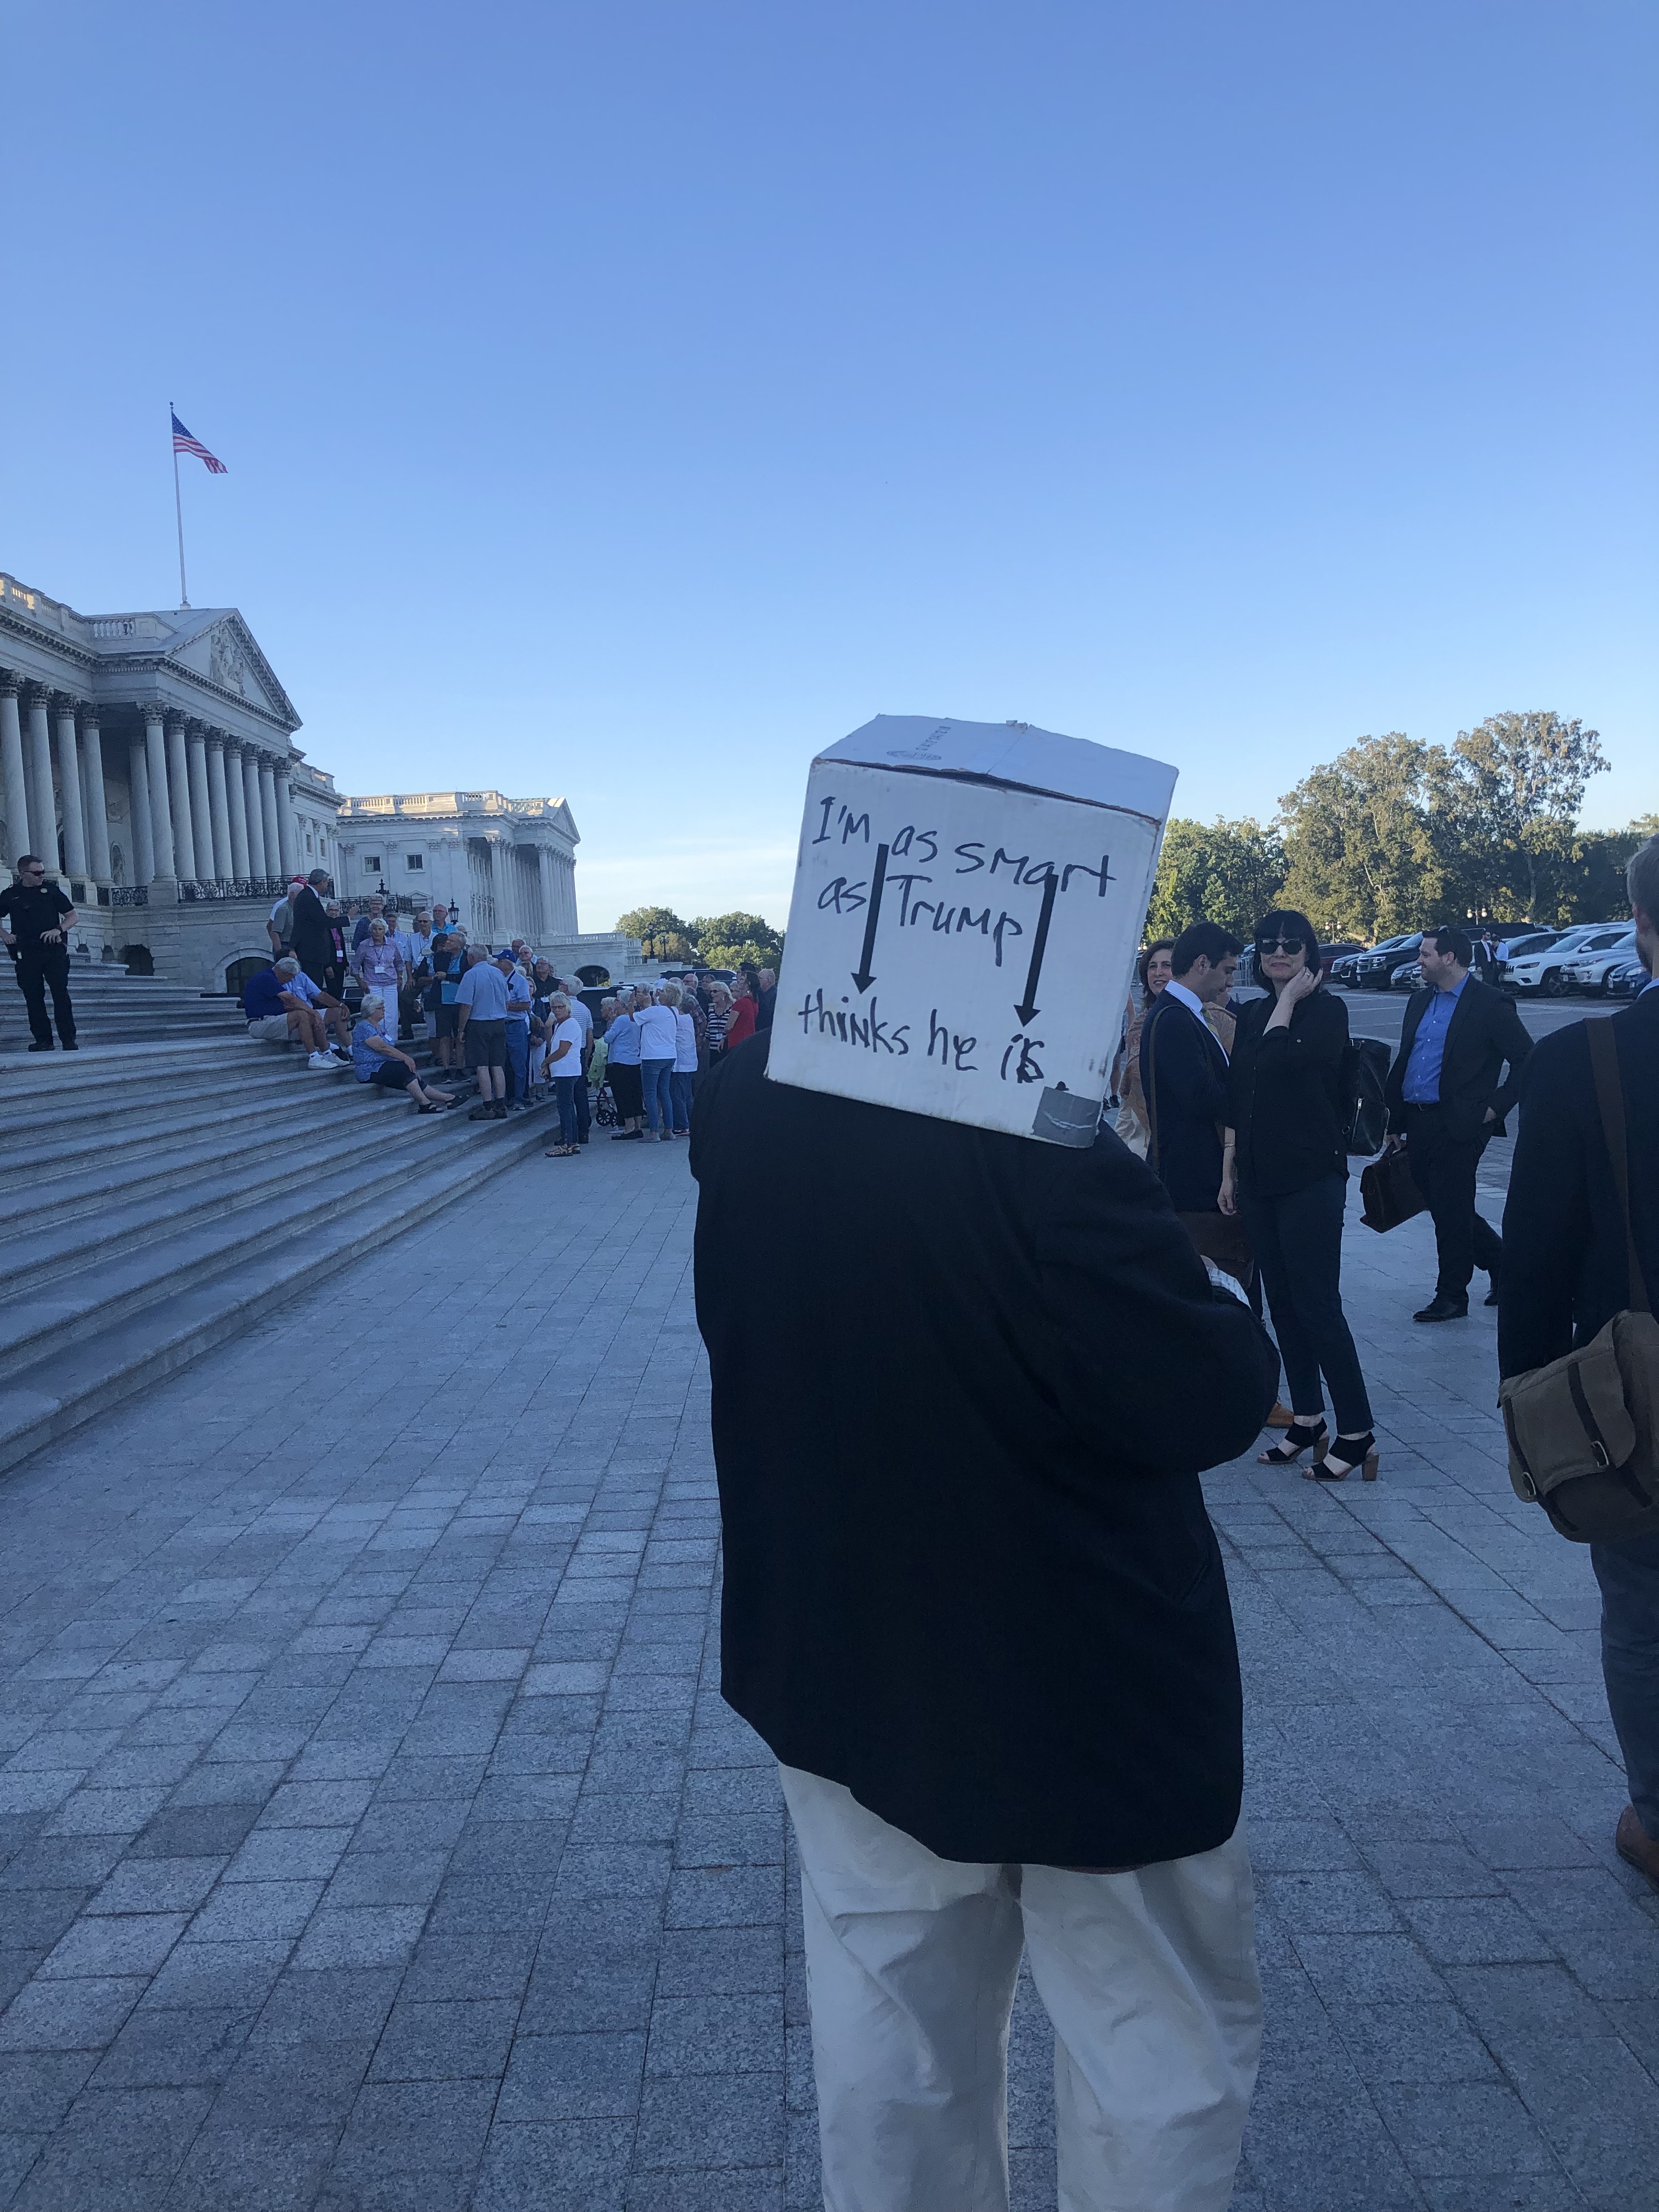 Man in a suit wearing a box on his head that says “I’m as same as Trump thinks he is.” 